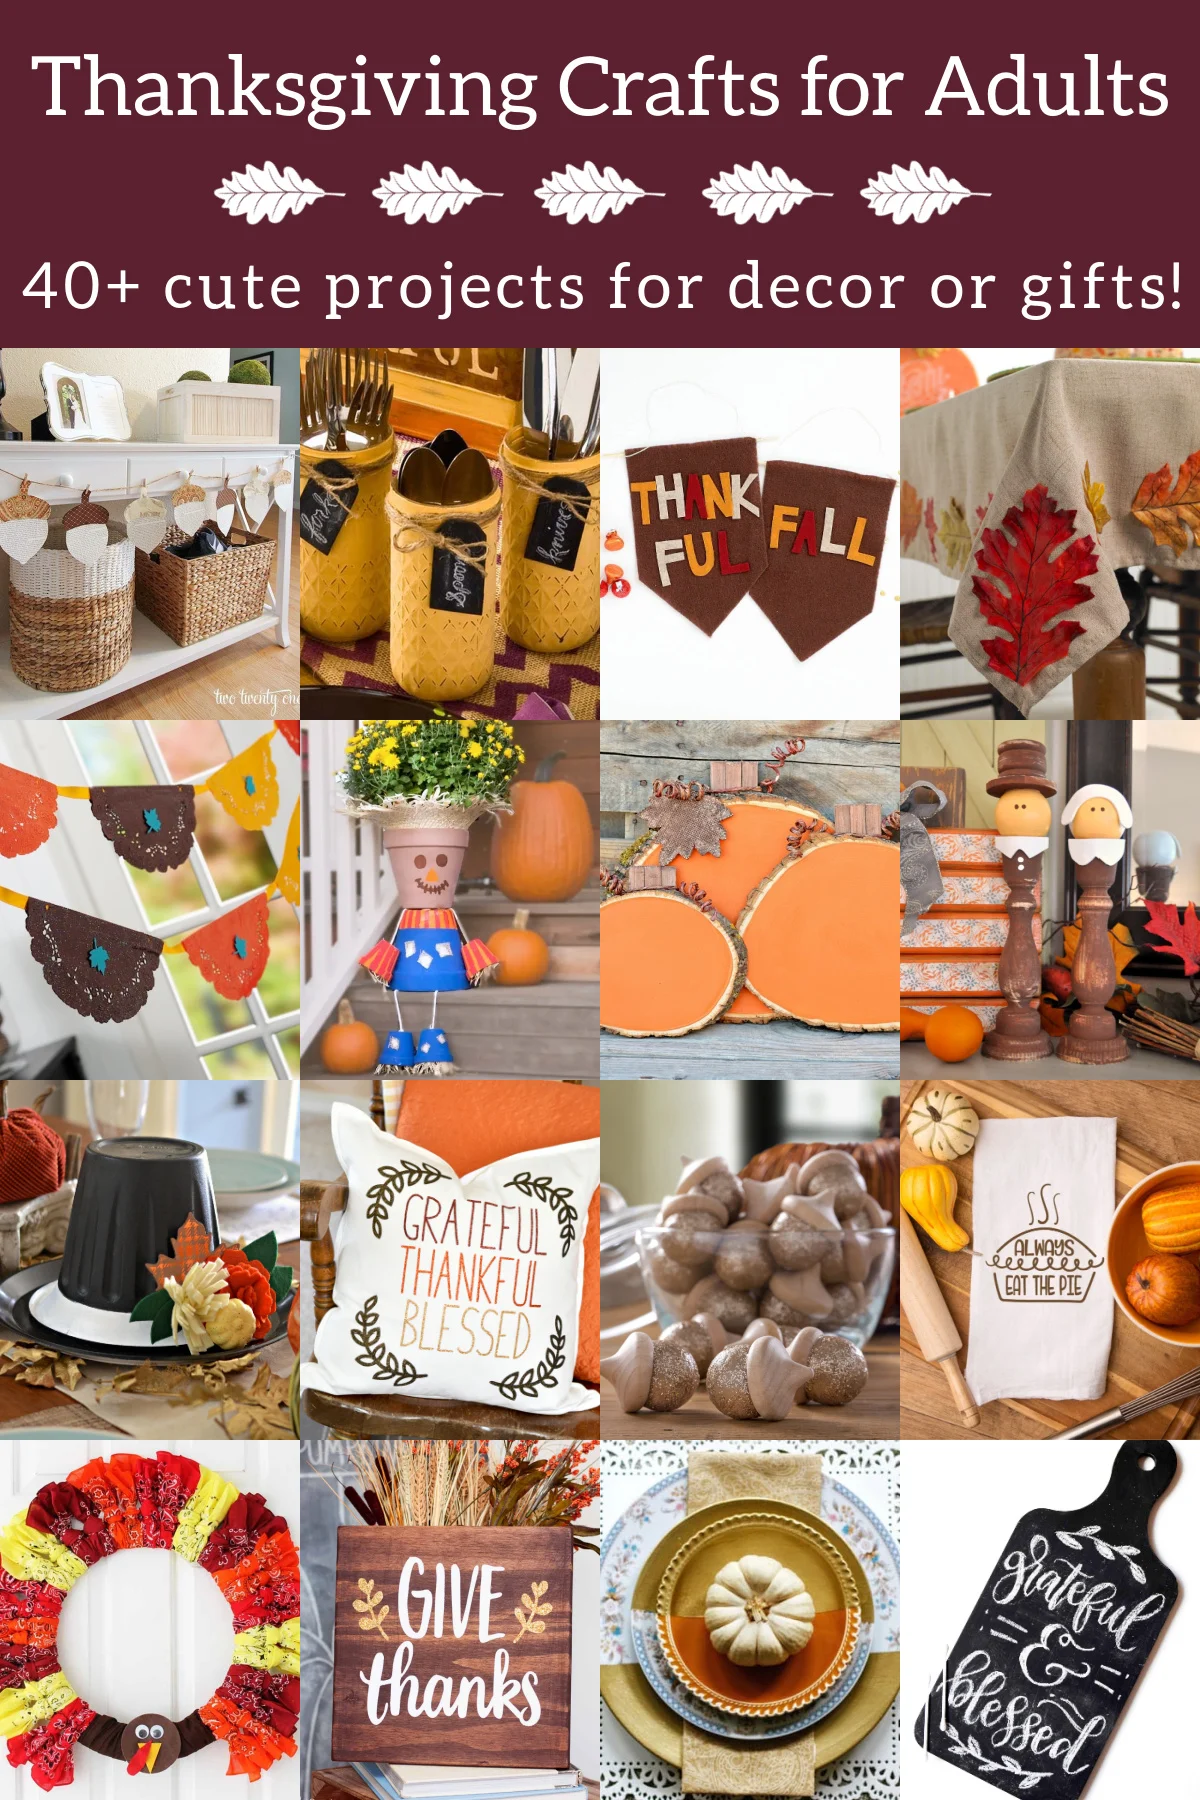 Thanksgiving Crafts for Adults (40+ Ideas!) - Mod Podge Rocks